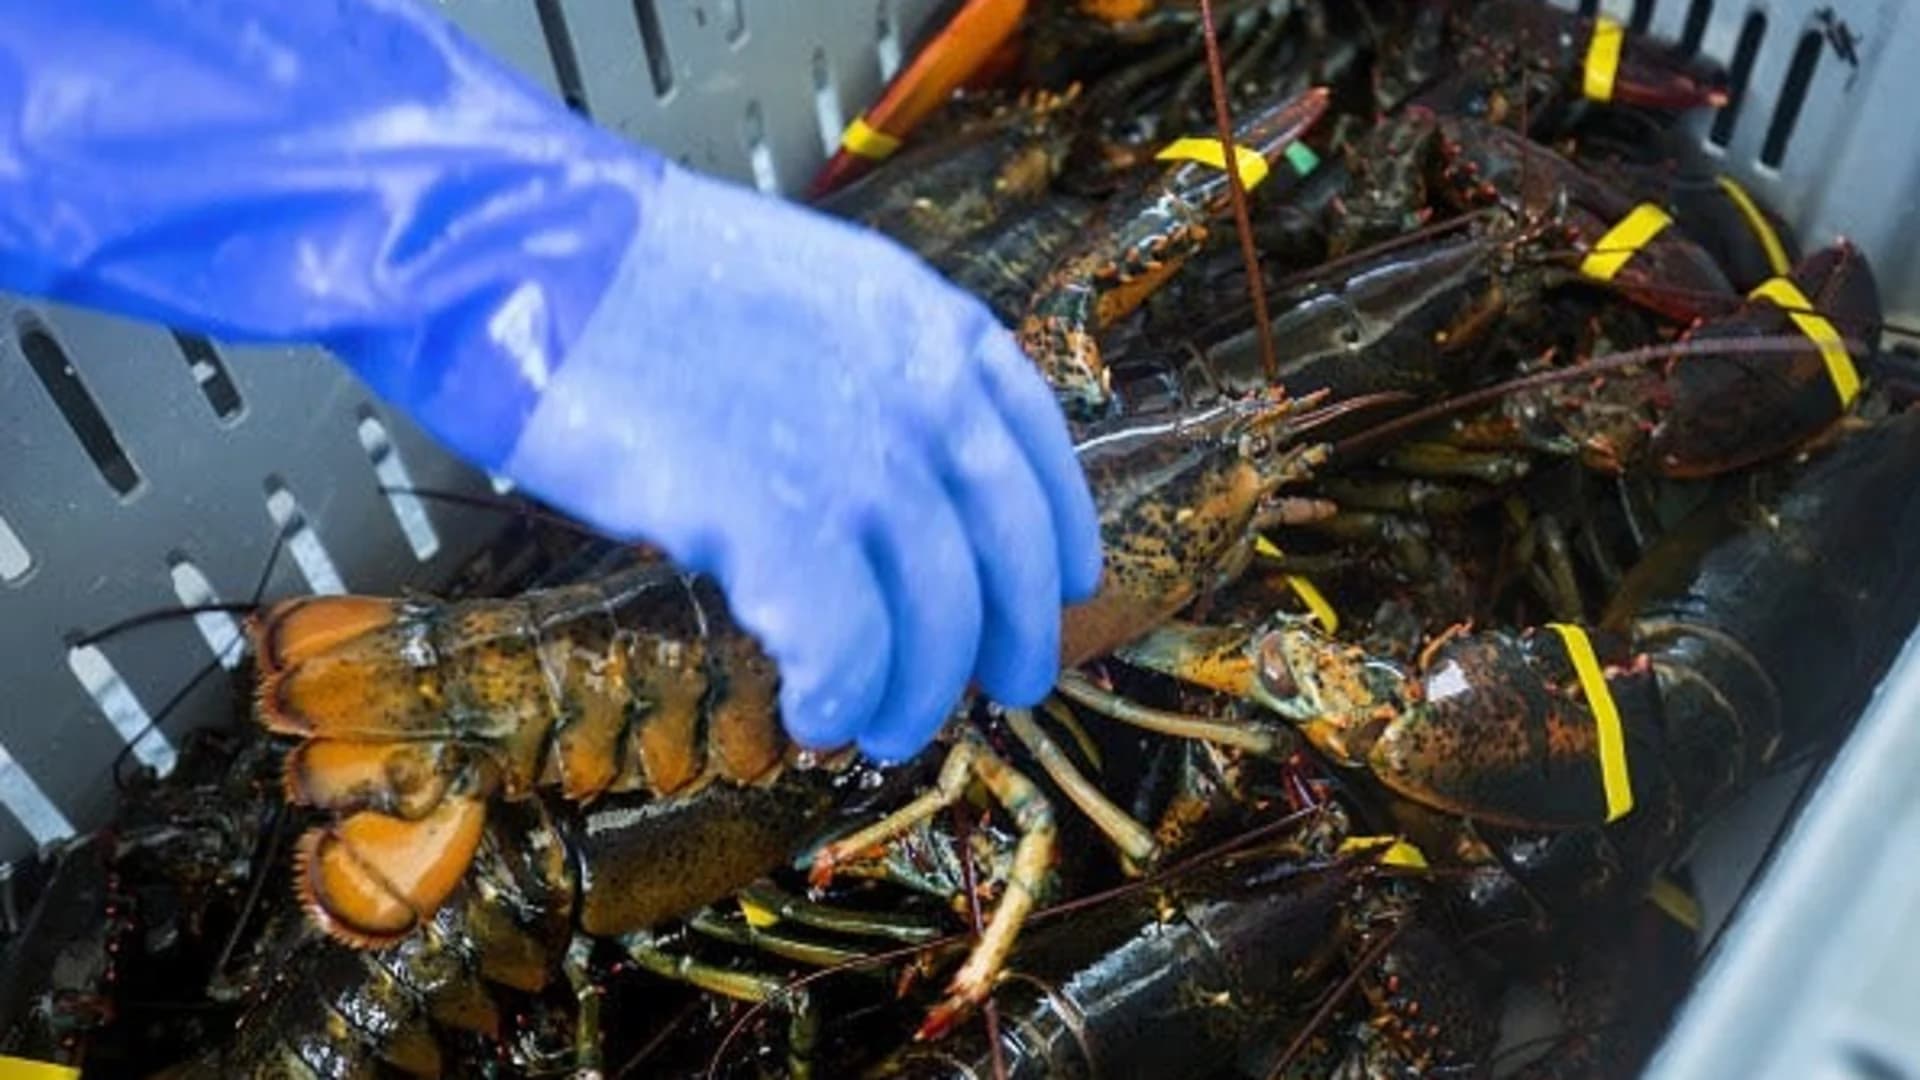 Baked before boiled, lobster farm using marijuana to ease trauma of cooking